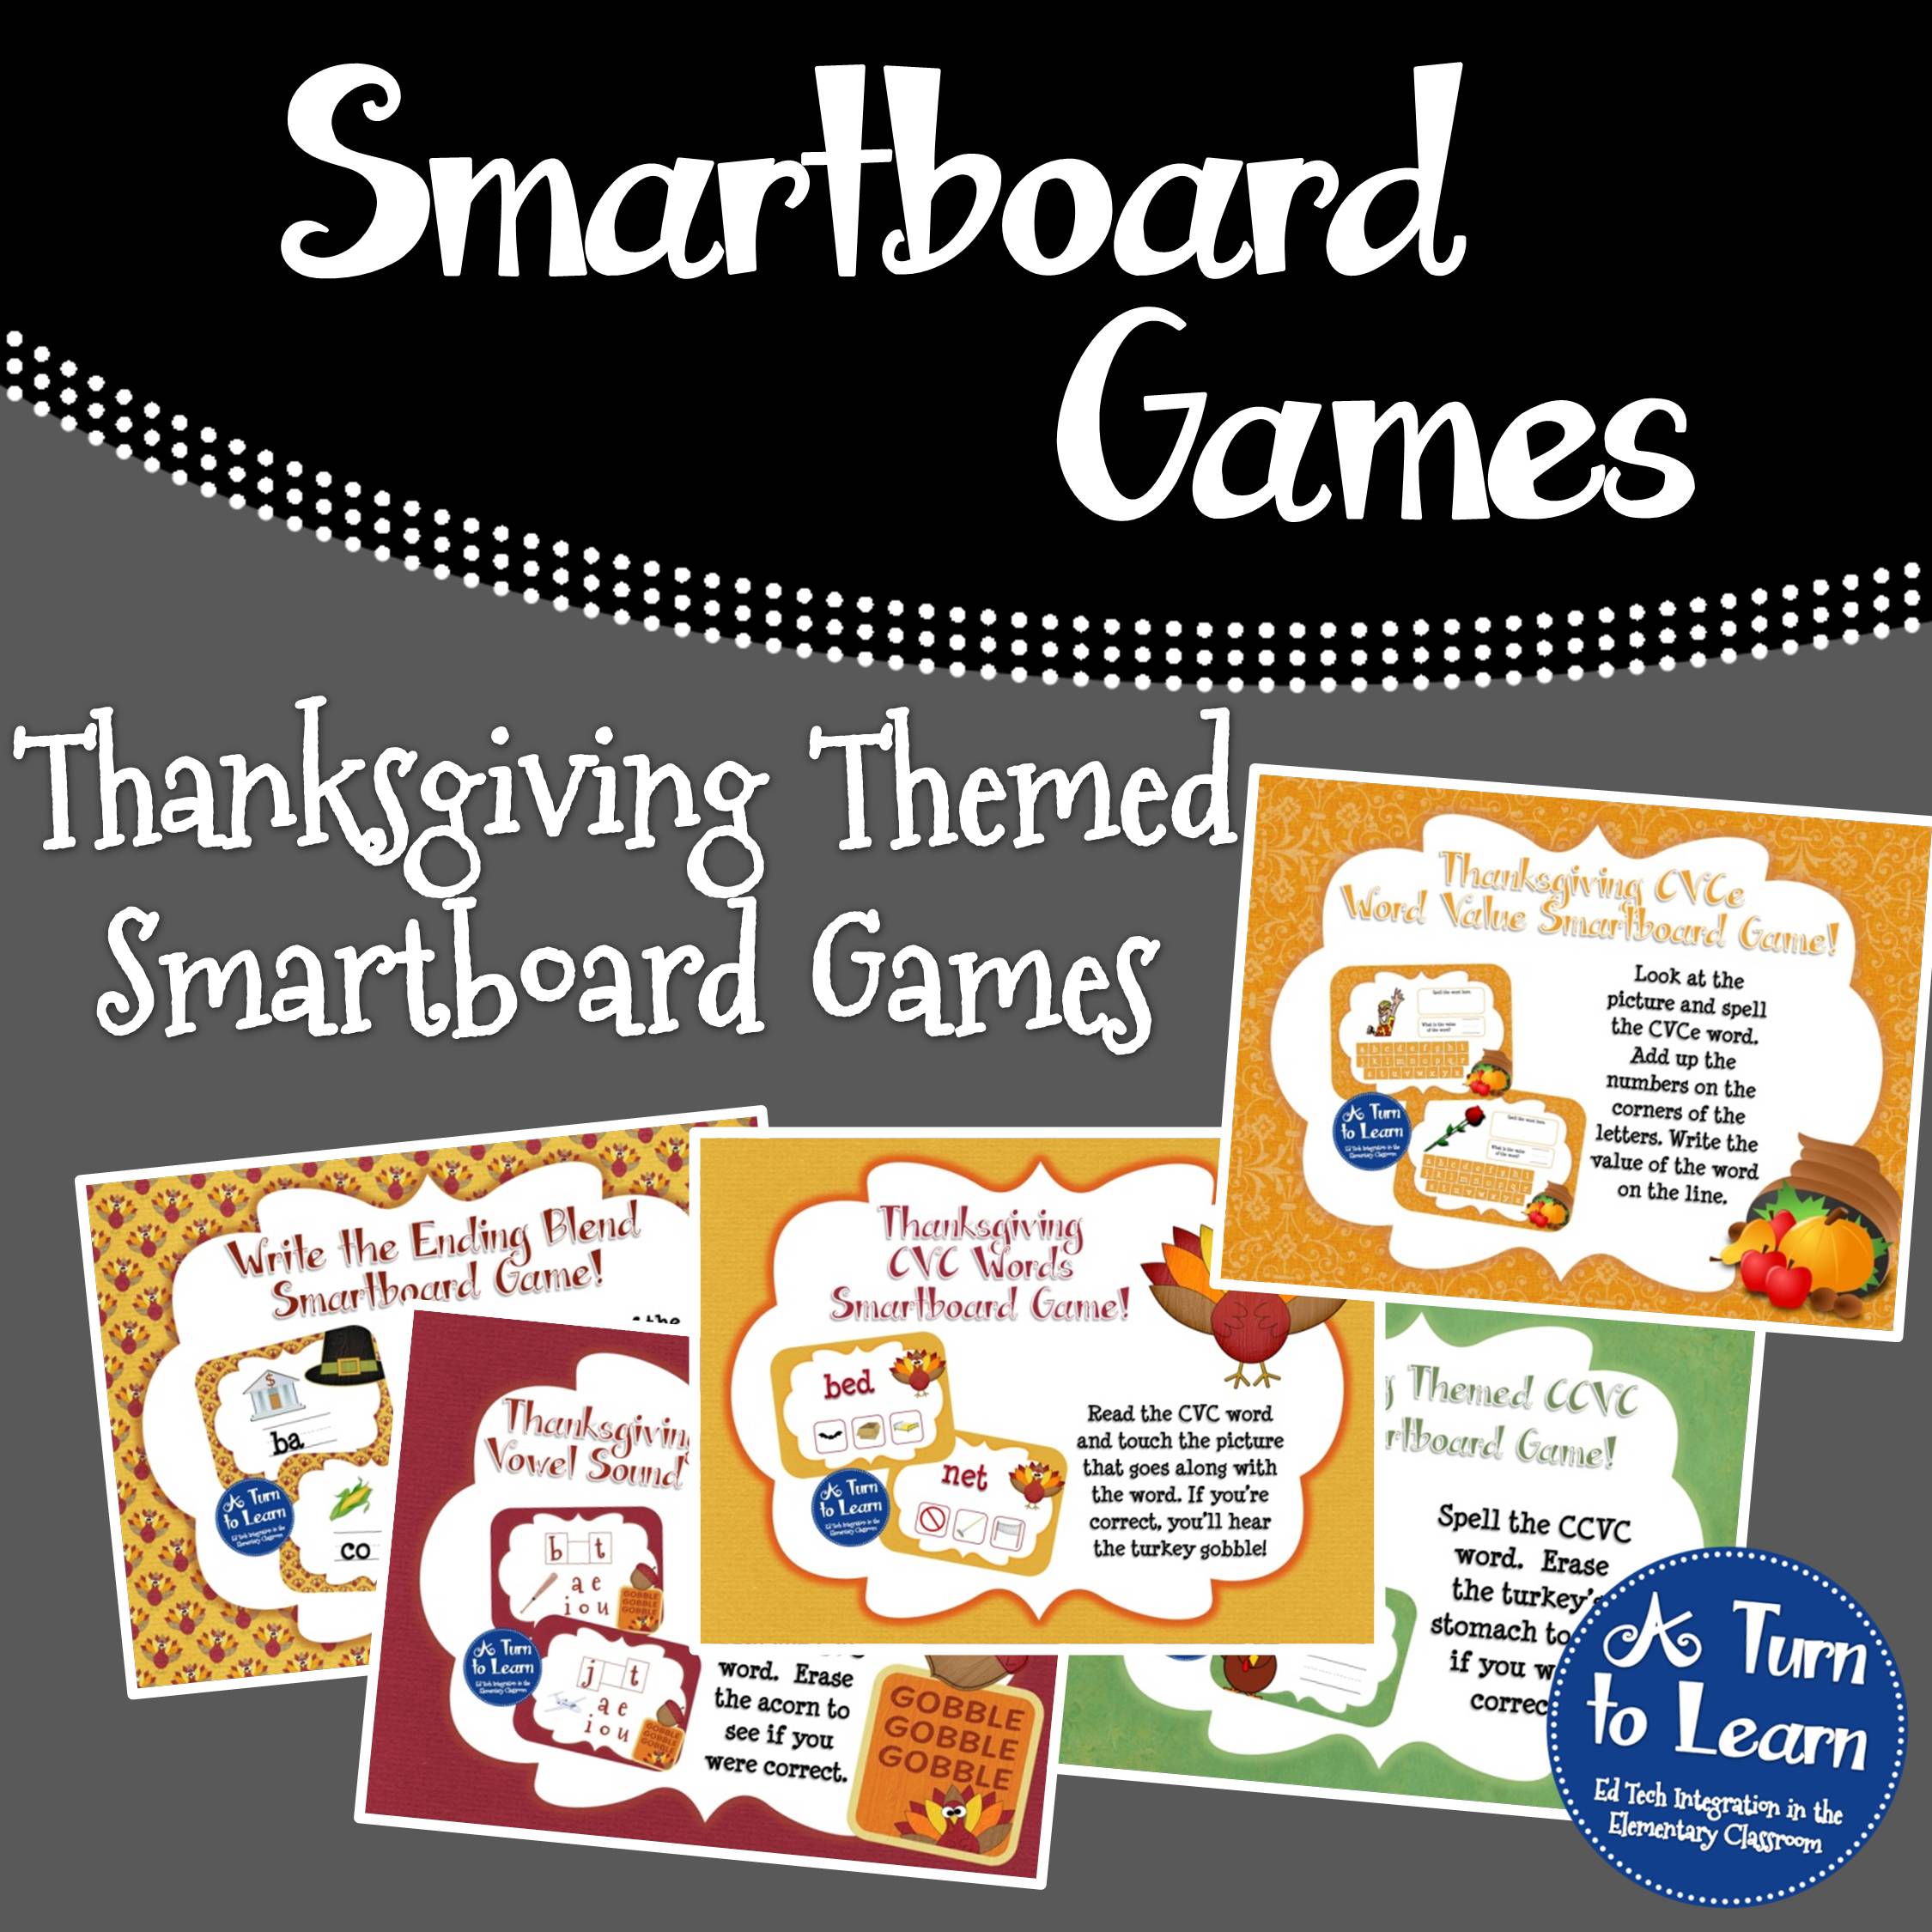 Thanksgiving Themed Games for Smartboard/Promethean Board... Practice CVC and CVCe words as well as beginning and ending blends, 